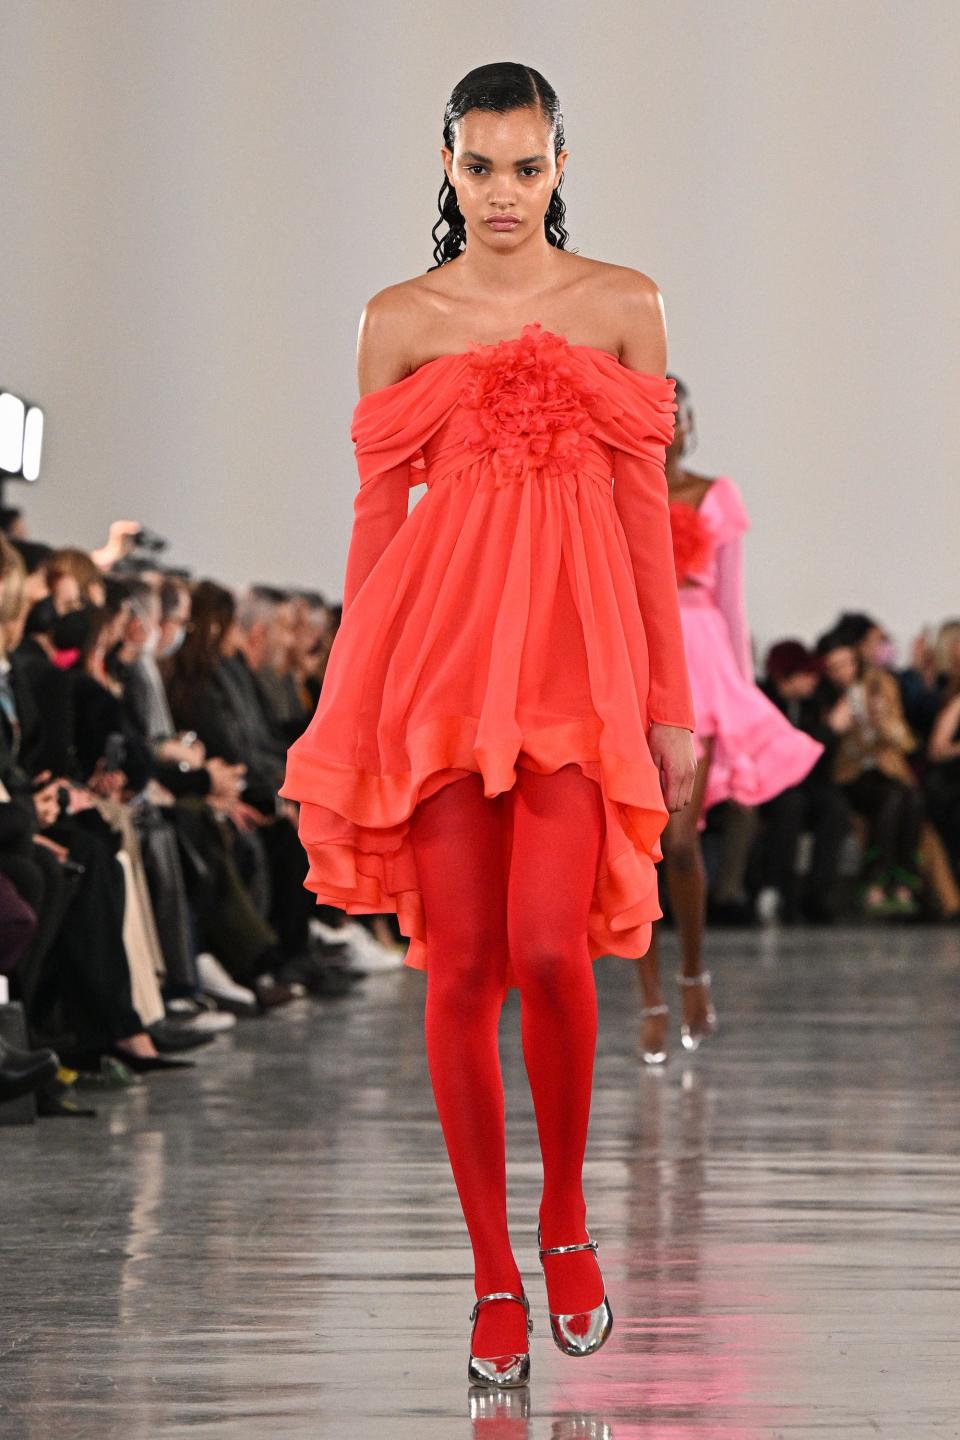 A model walks down a runway wearing an off-the-shoulder red dress with red tights and silver shoes.